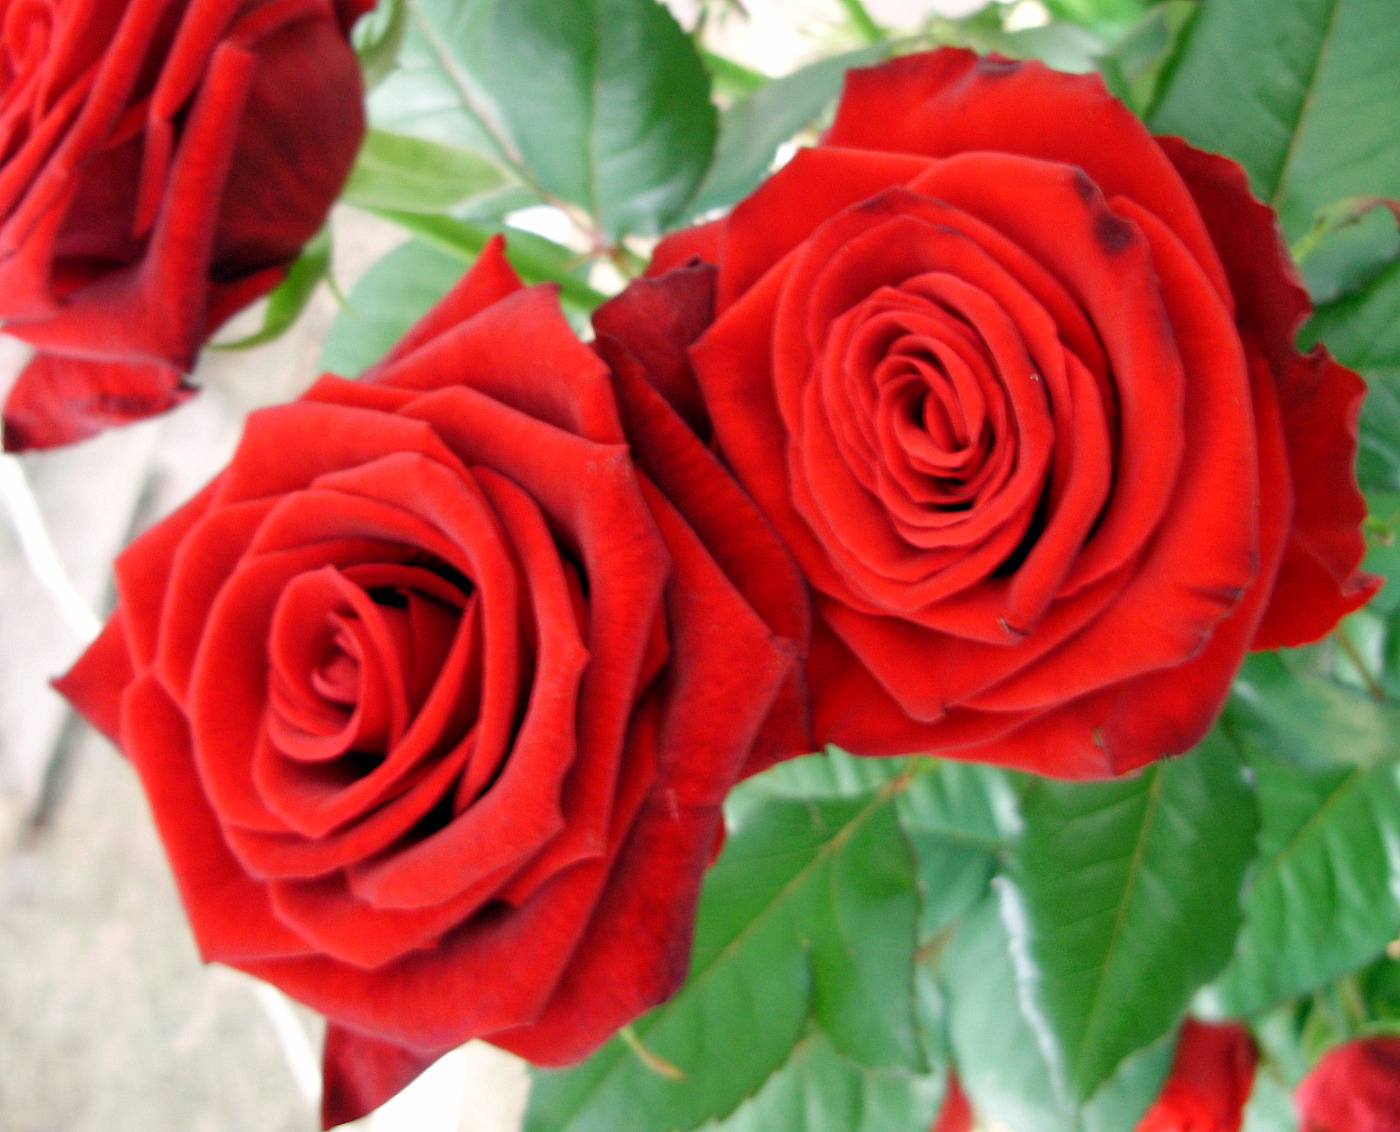 Red roses - Roses Photo (11353937) - Fanpop